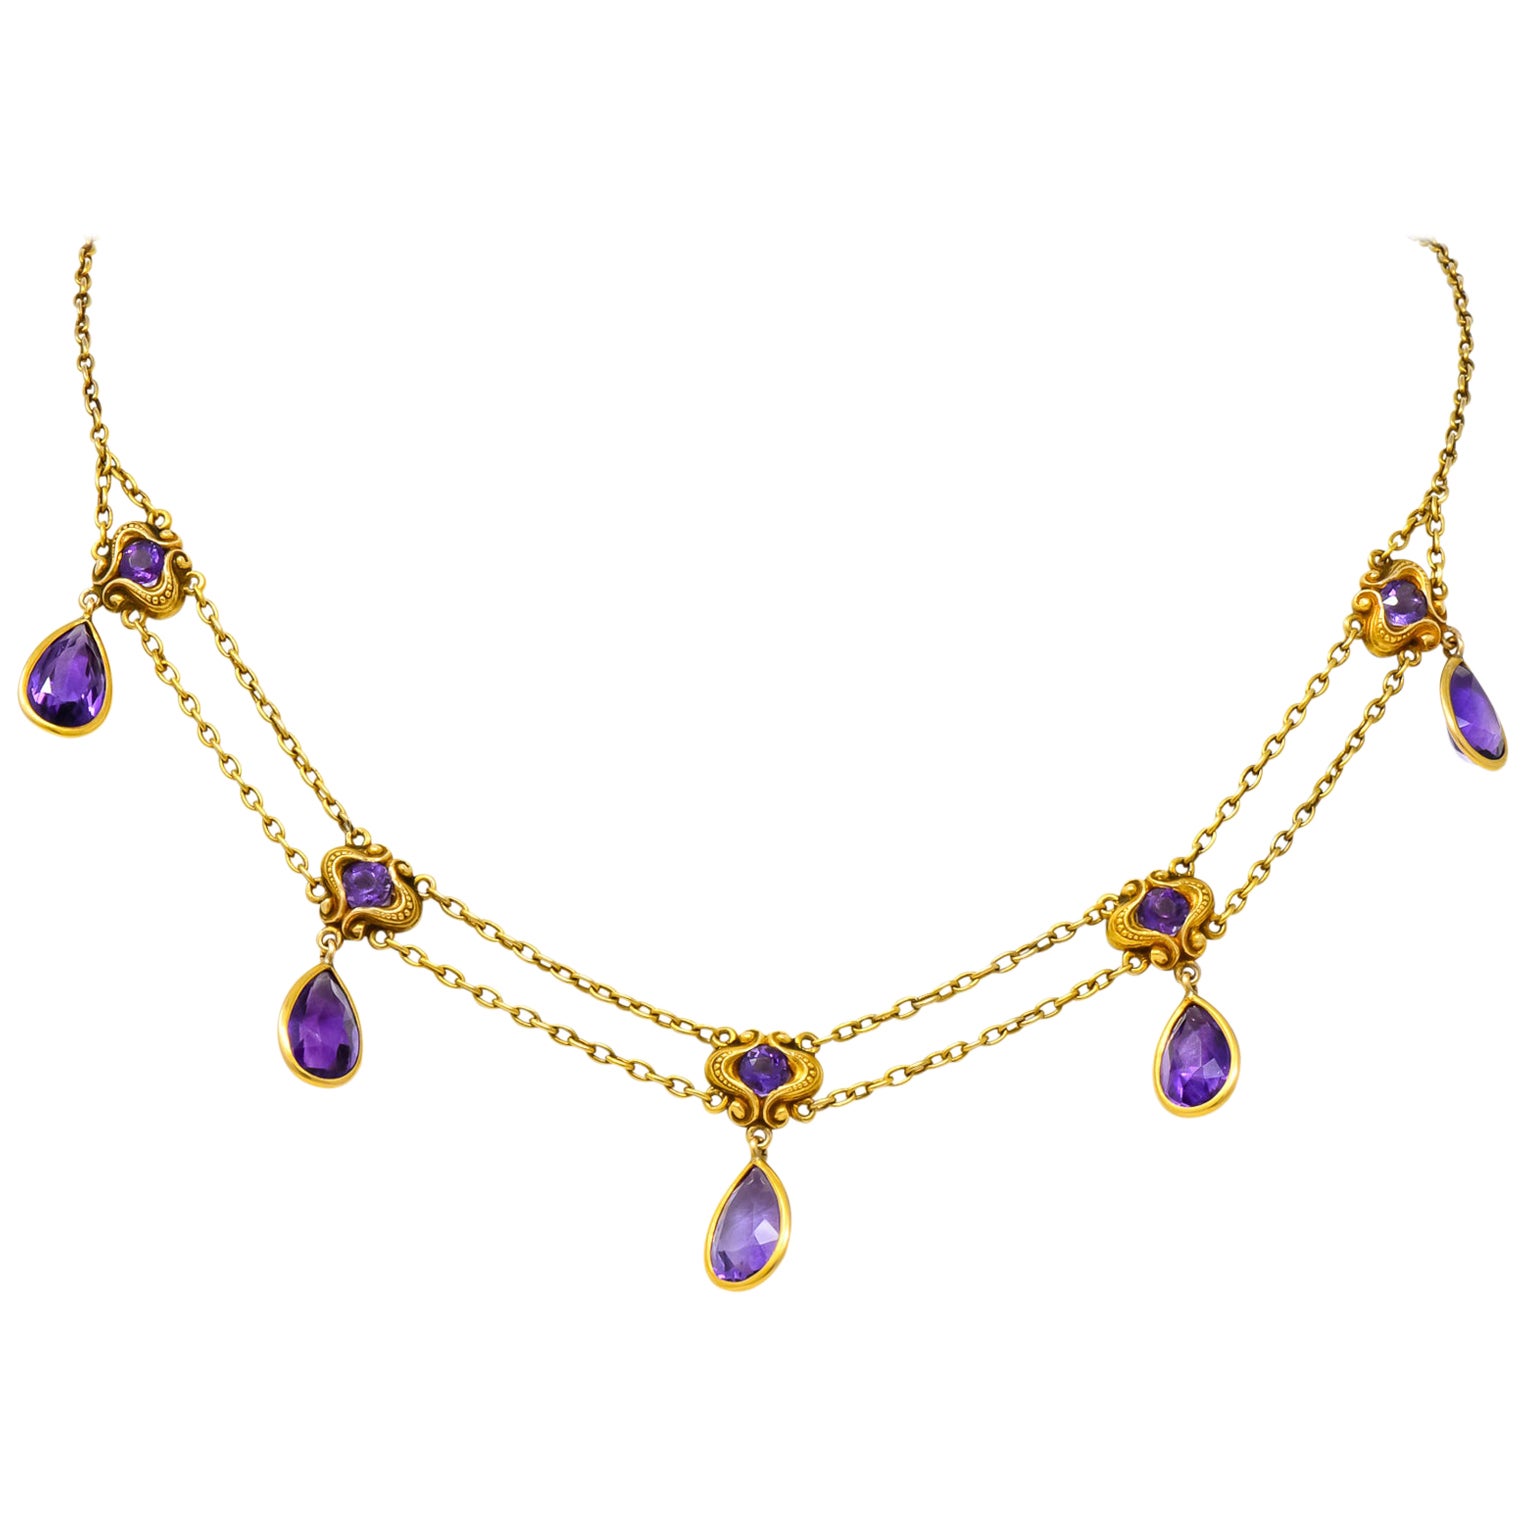 Art Nouveau Enamel Garland Necklace with Pearls and Amethyst For Sale ...